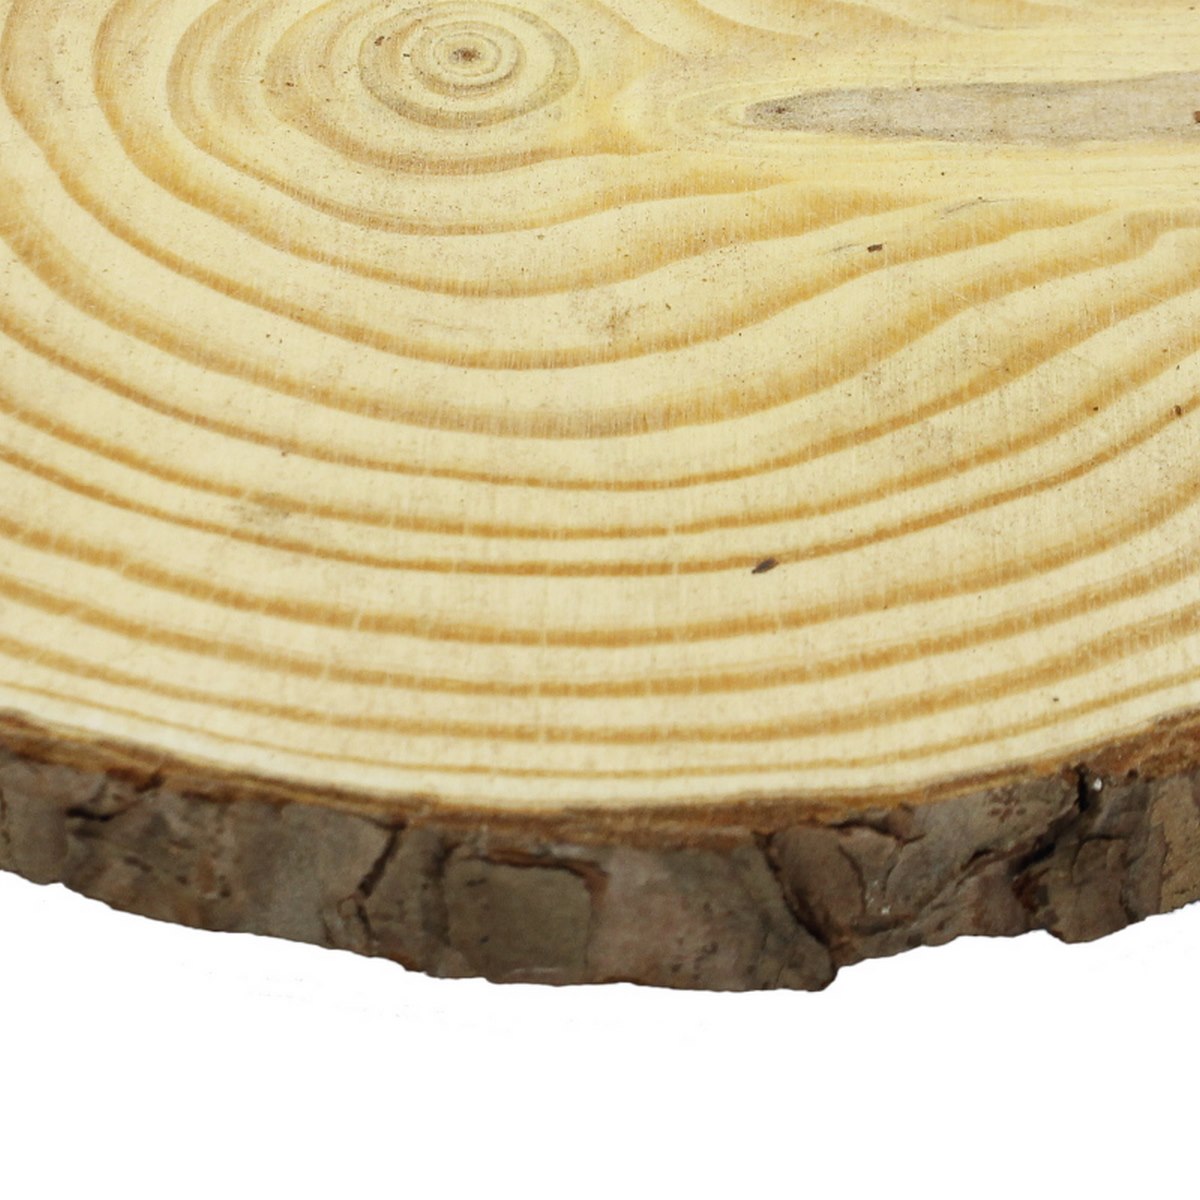 jags-mumbai Wooden Slice and Cut Out Round Wood Plate 14CM TO 15CM 1.5CM RWP15CM